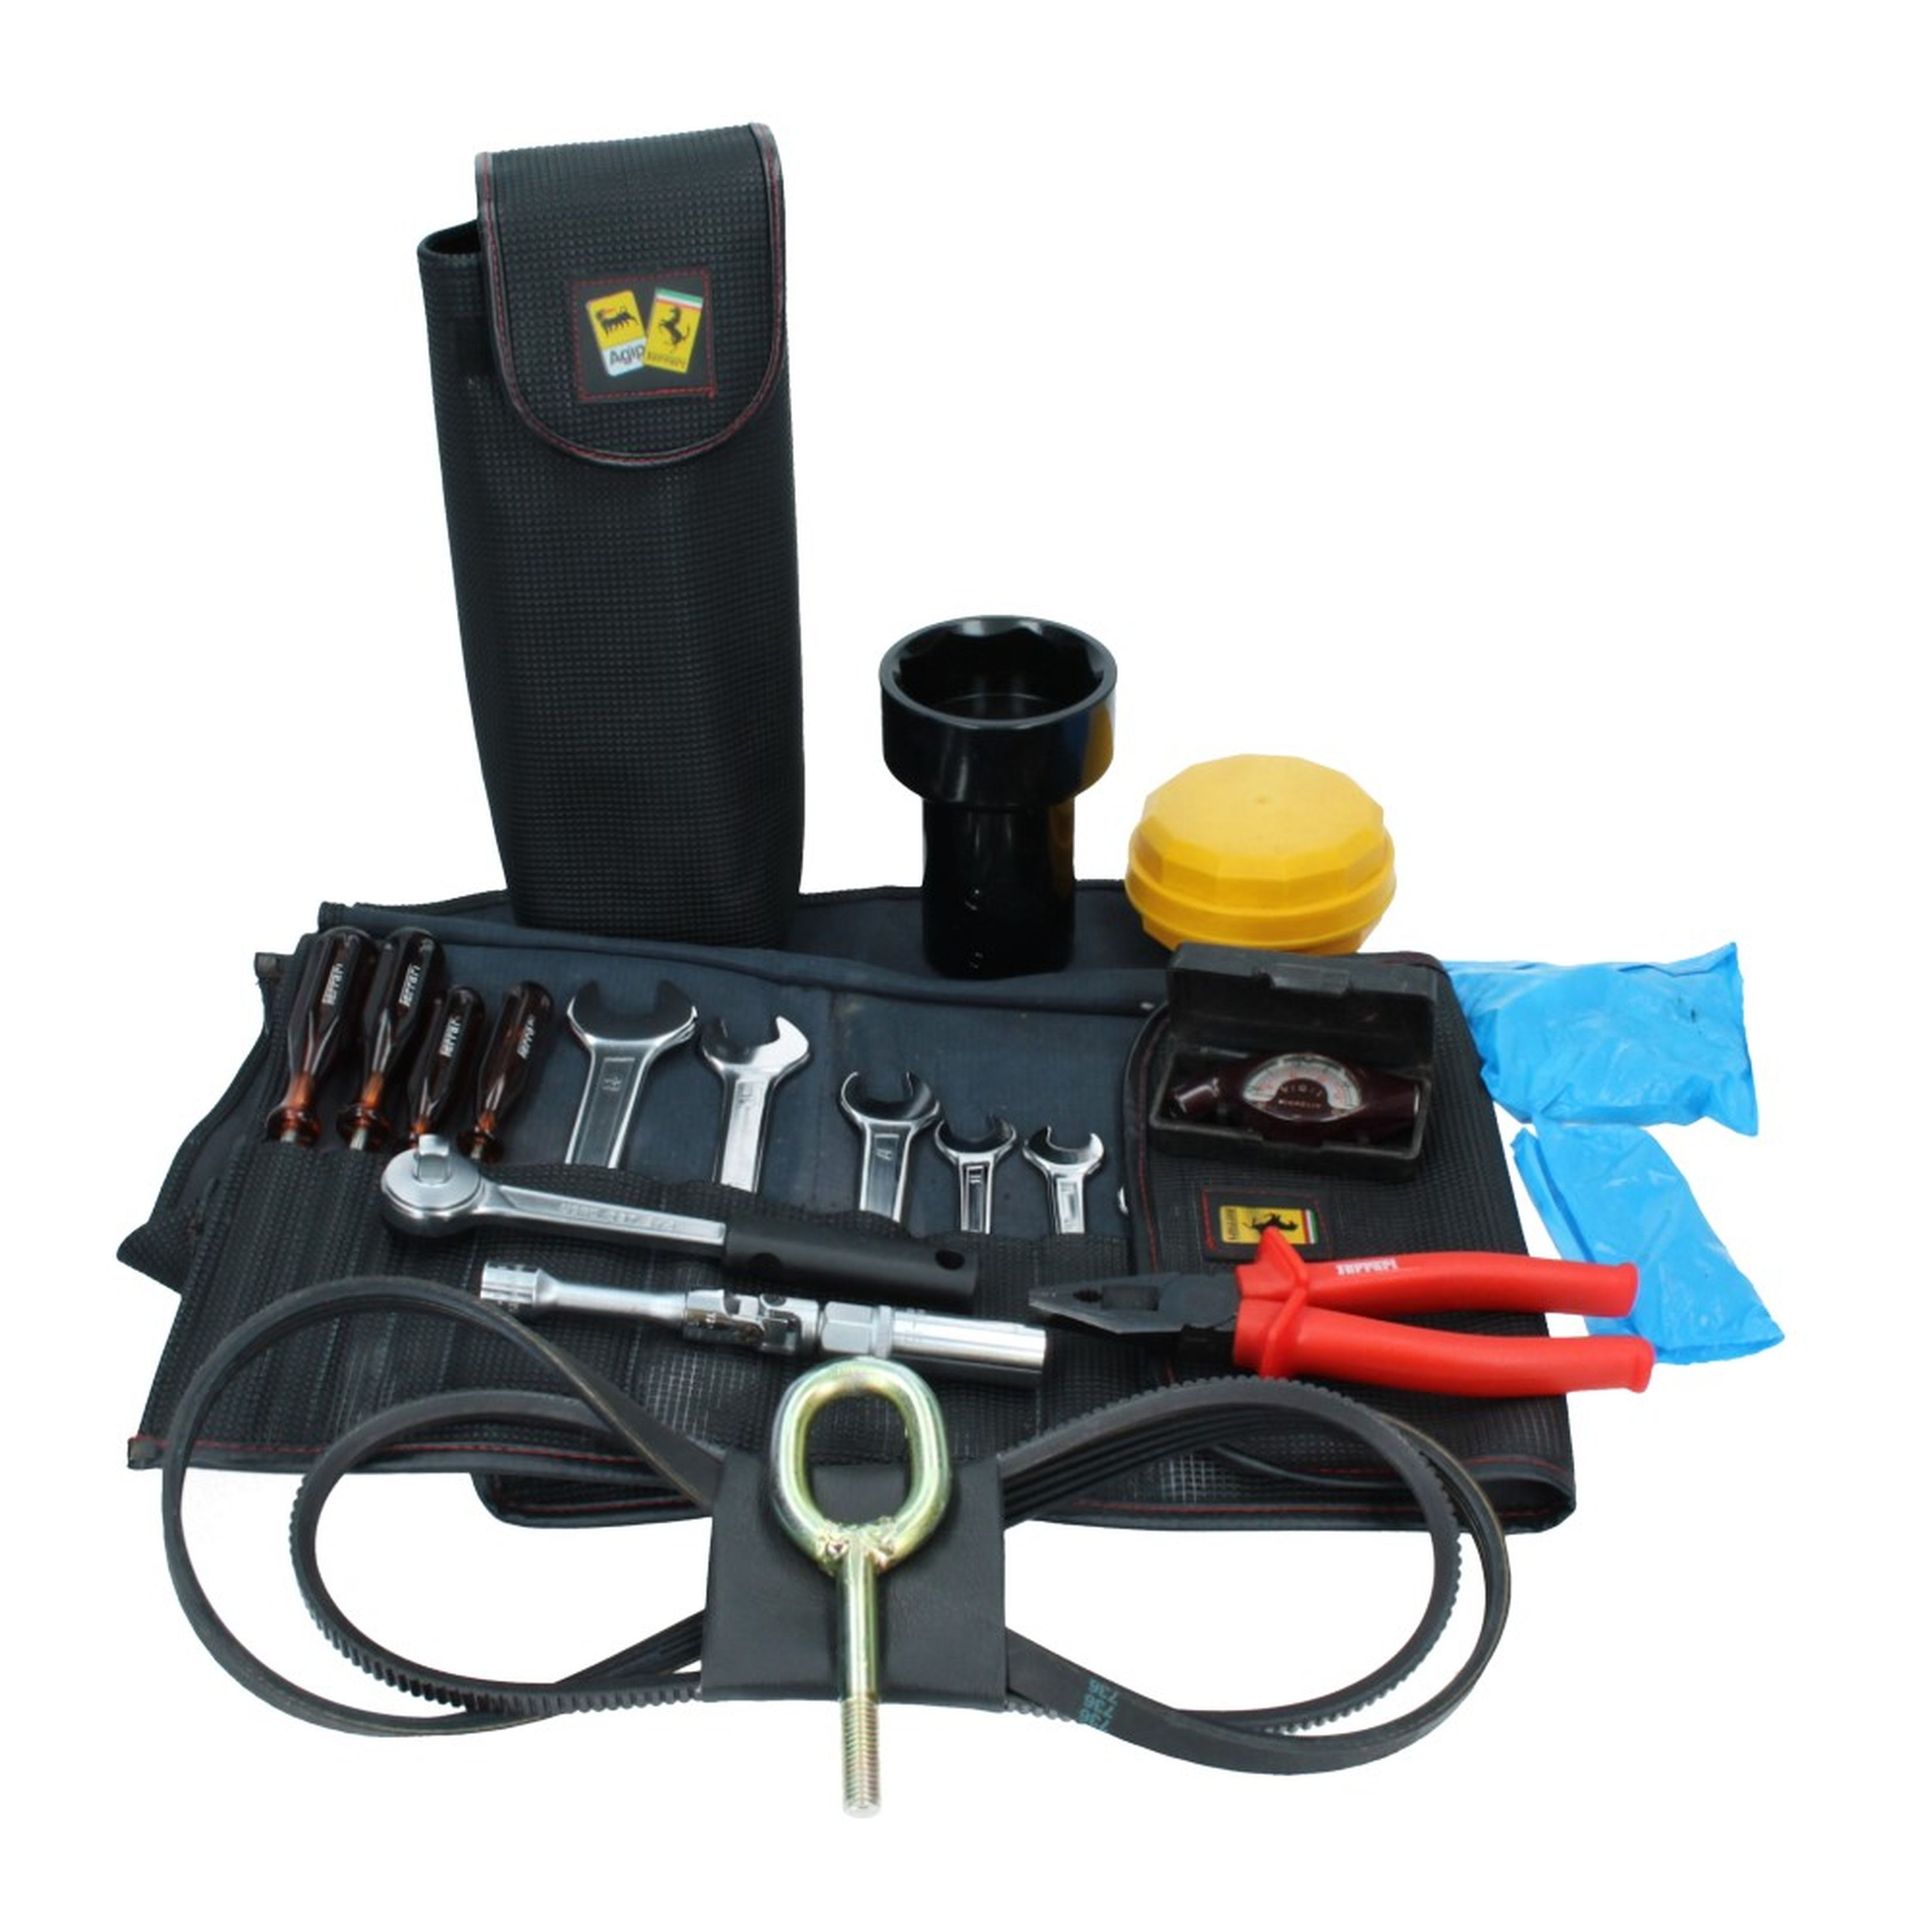 F40 Toolkit Complete